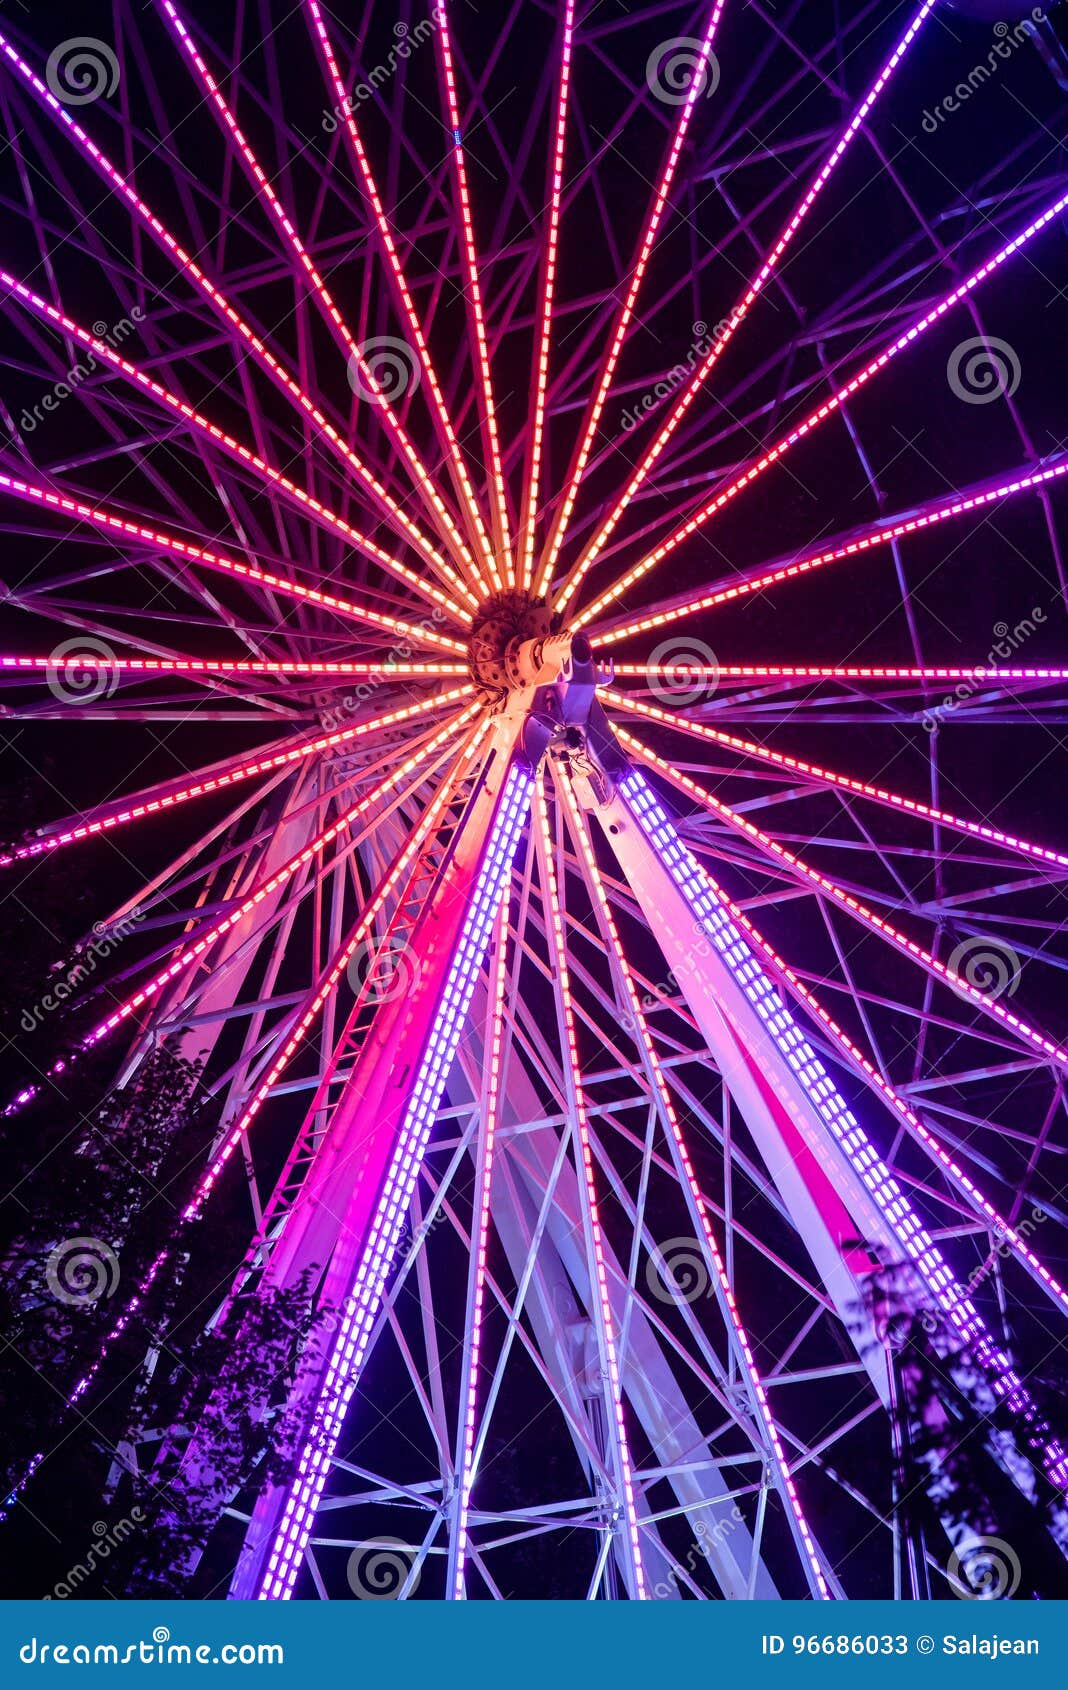 BONTIDA, ROMANIA - JULY 14, 2017: People of Electric Castle festival enjoying a ride at night on the Giant ferris wheel